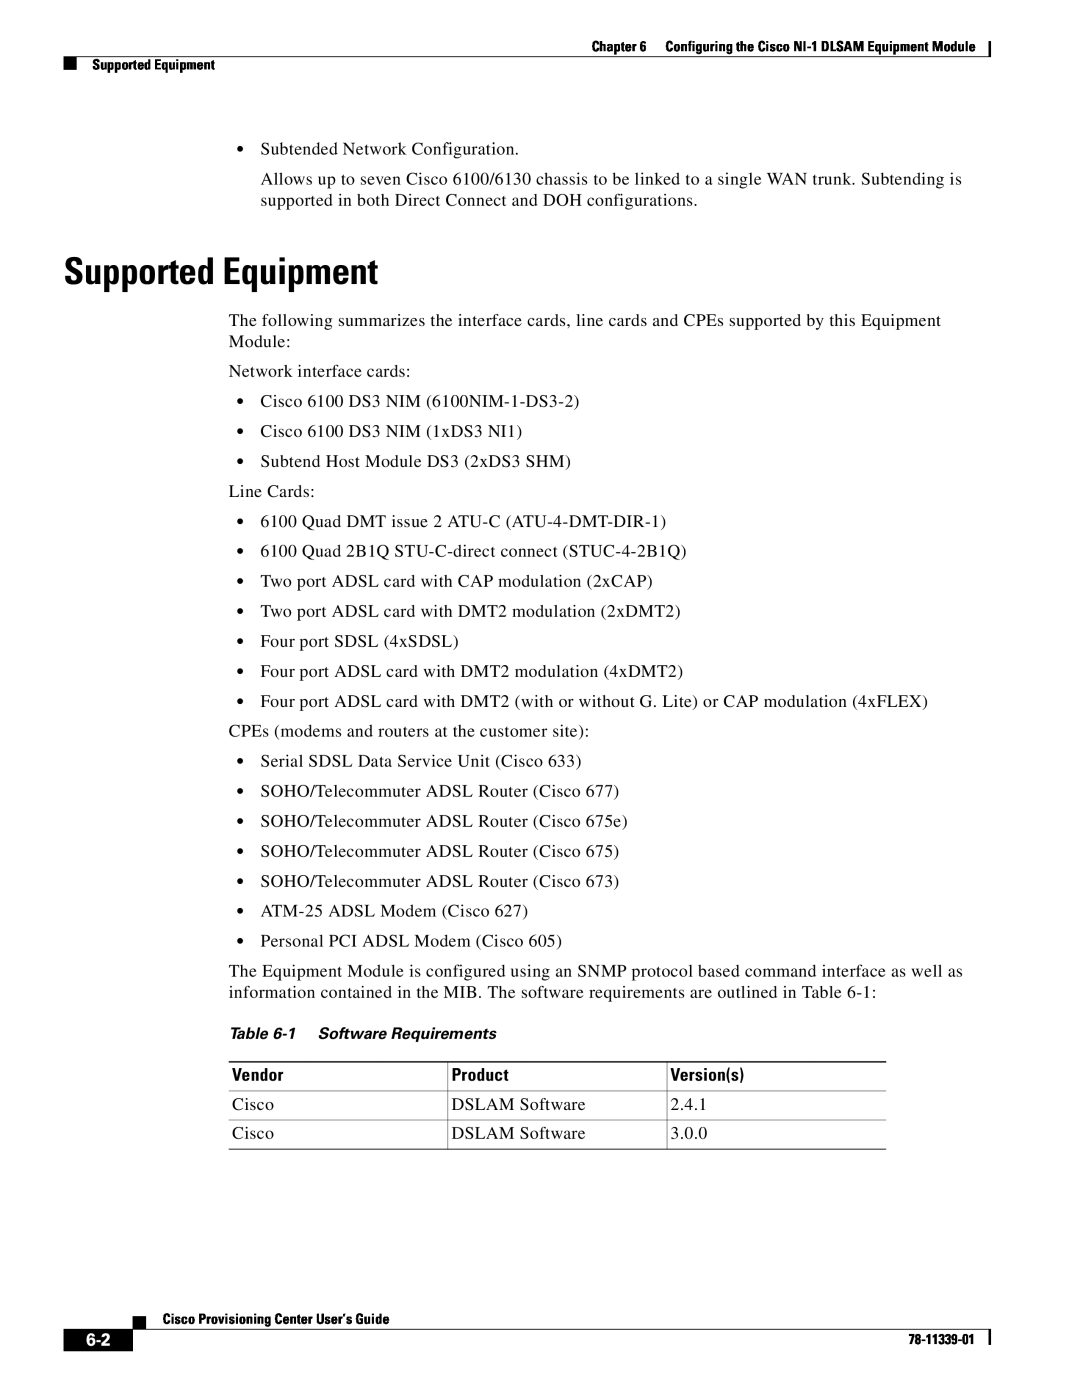 Cisco Systems NI-1 manual Supported Equipment, Vendor, Product, Versions 